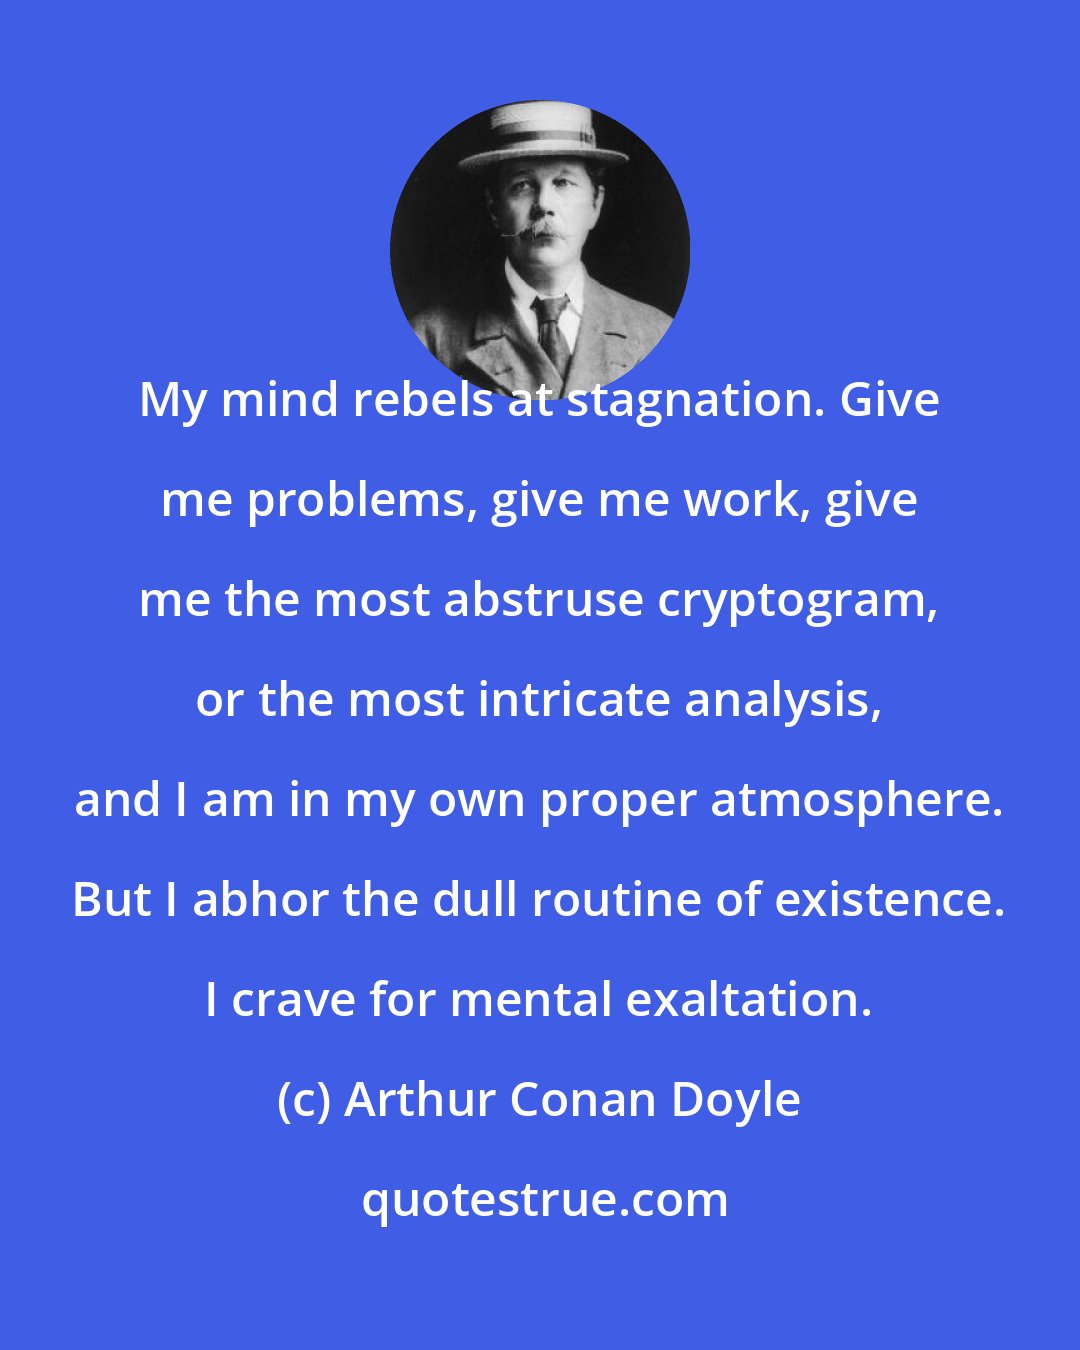 Arthur Conan Doyle: My mind rebels at stagnation. Give me problems, give me work, give me the most abstruse cryptogram, or the most intricate analysis, and I am in my own proper atmosphere. But I abhor the dull routine of existence. I crave for mental exaltation.